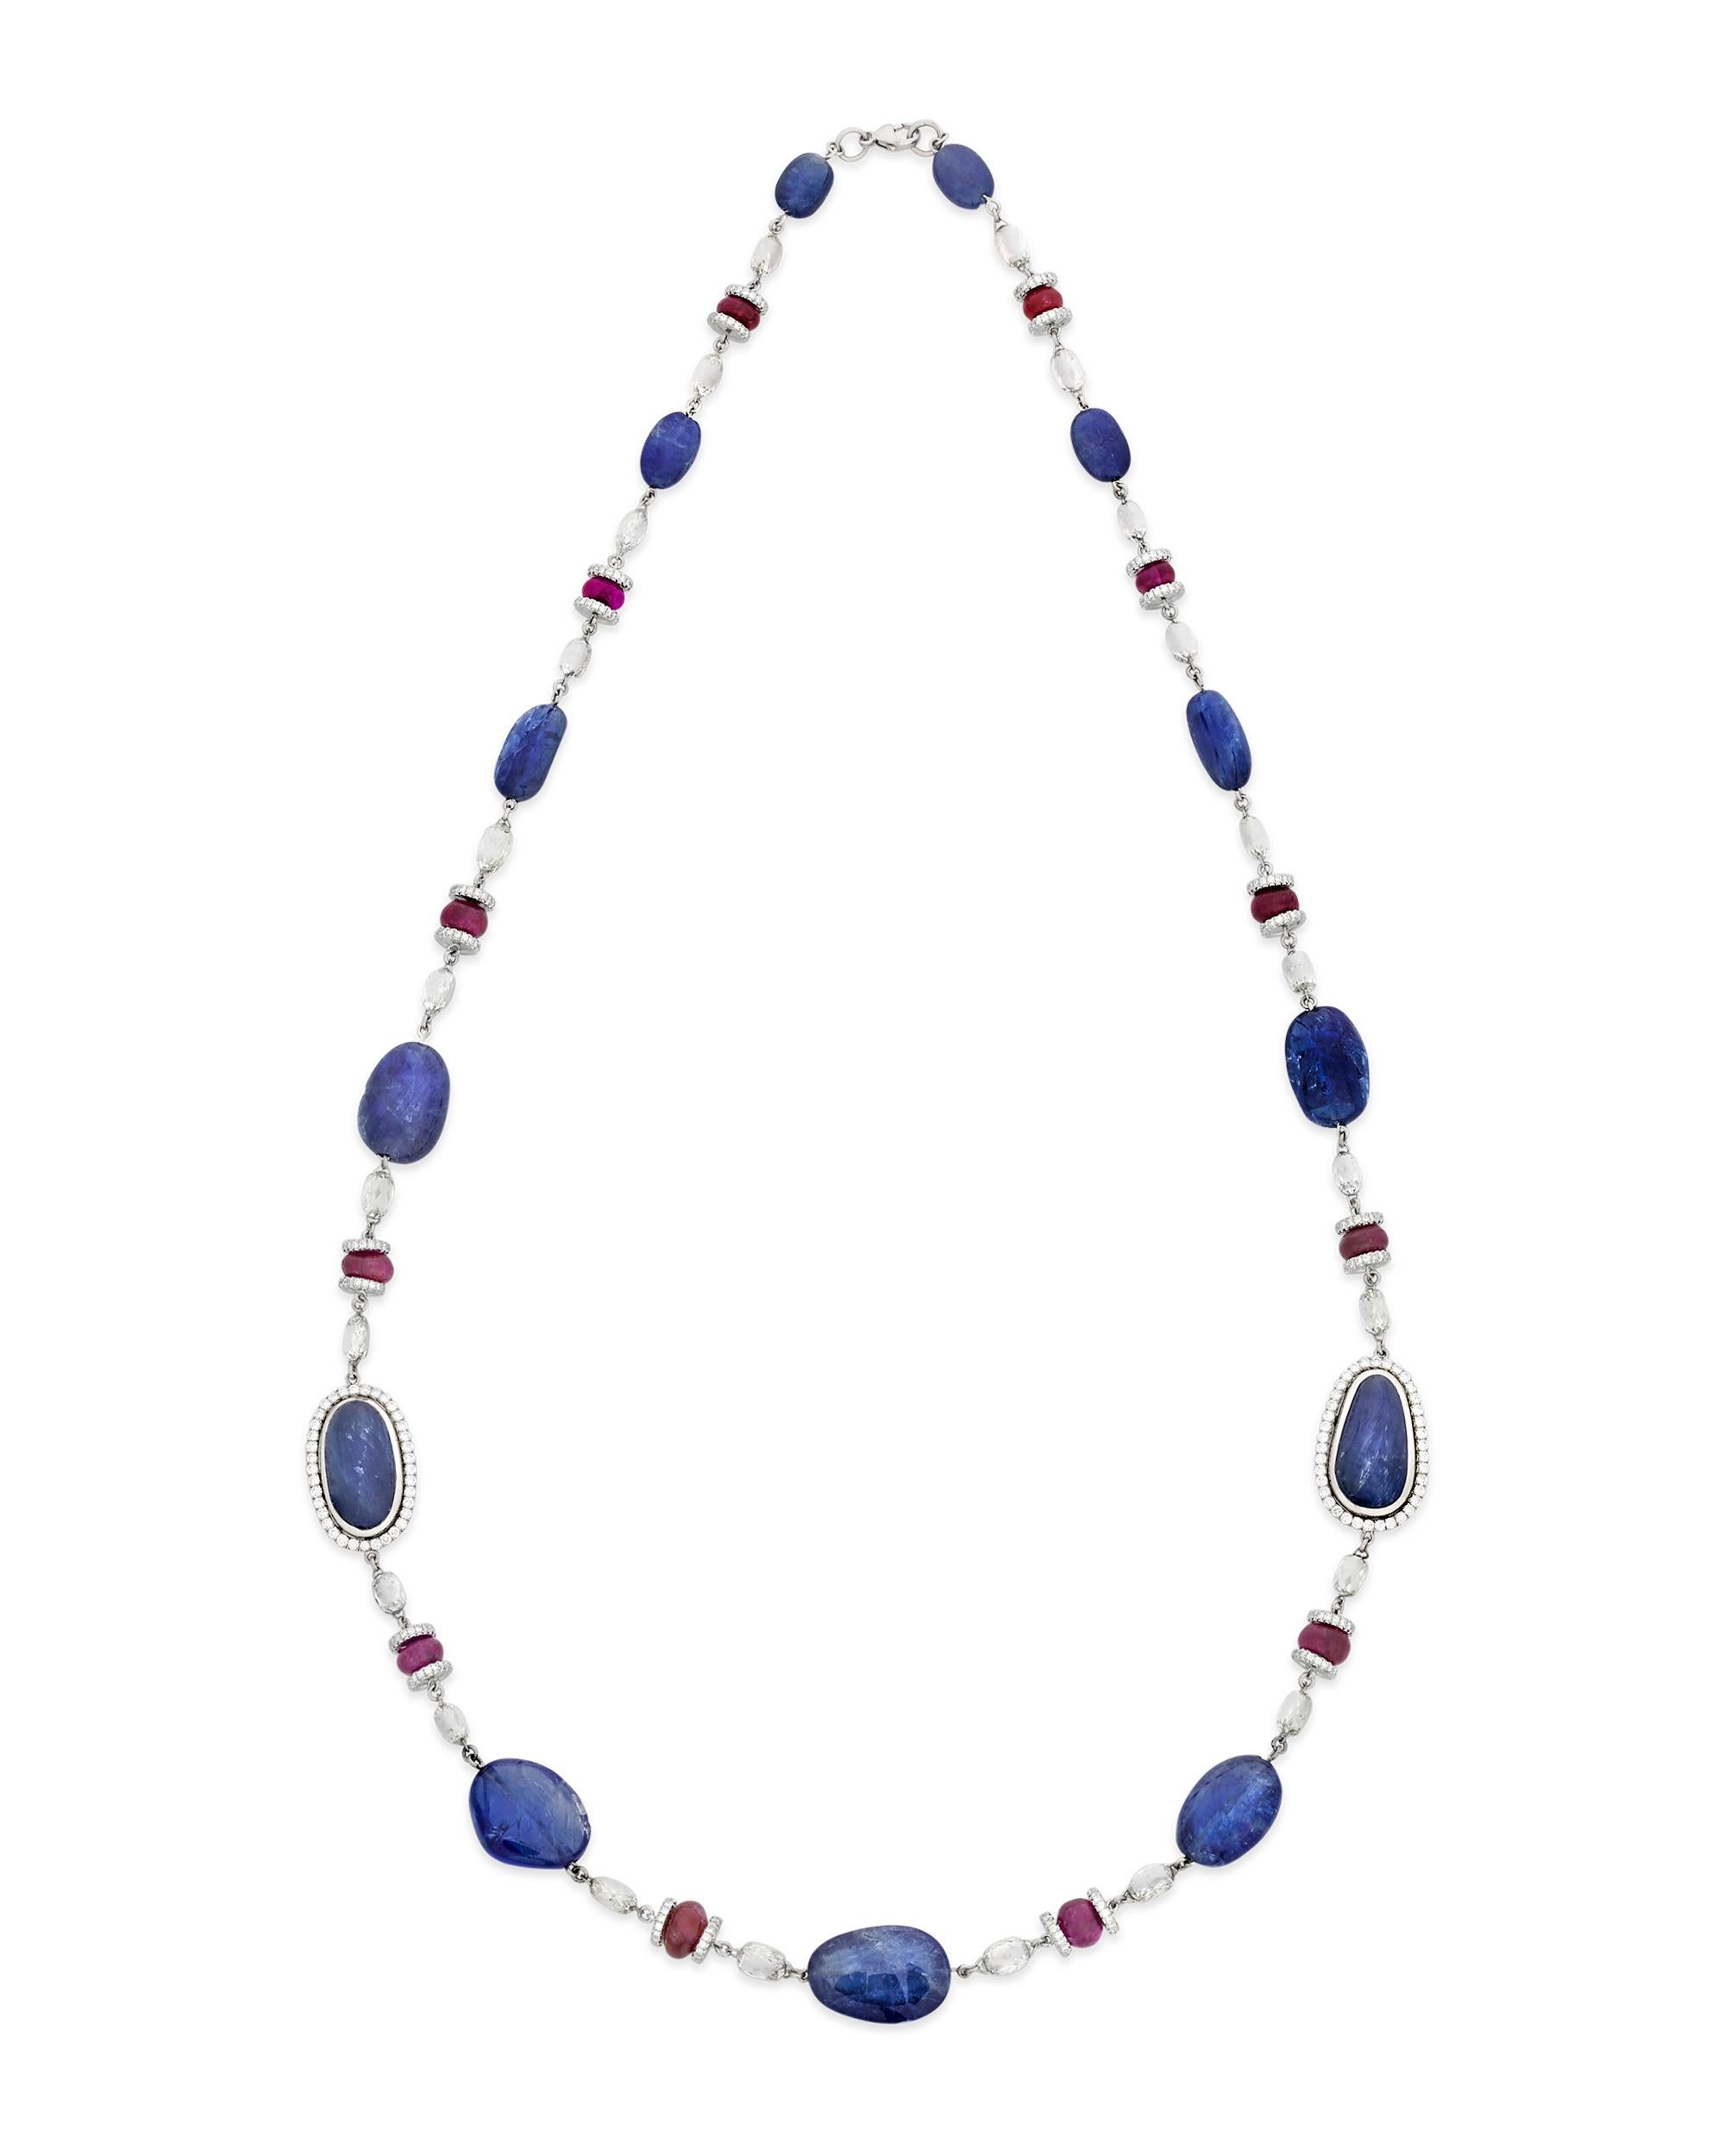 This highly unique, one-of-a-kind necklace is set with an array of cabochon sapphires and rubies. Beautifully polished with smooth surfaces and organic shapes, these gems display the best natural attributes of their gem type. The stones, which total